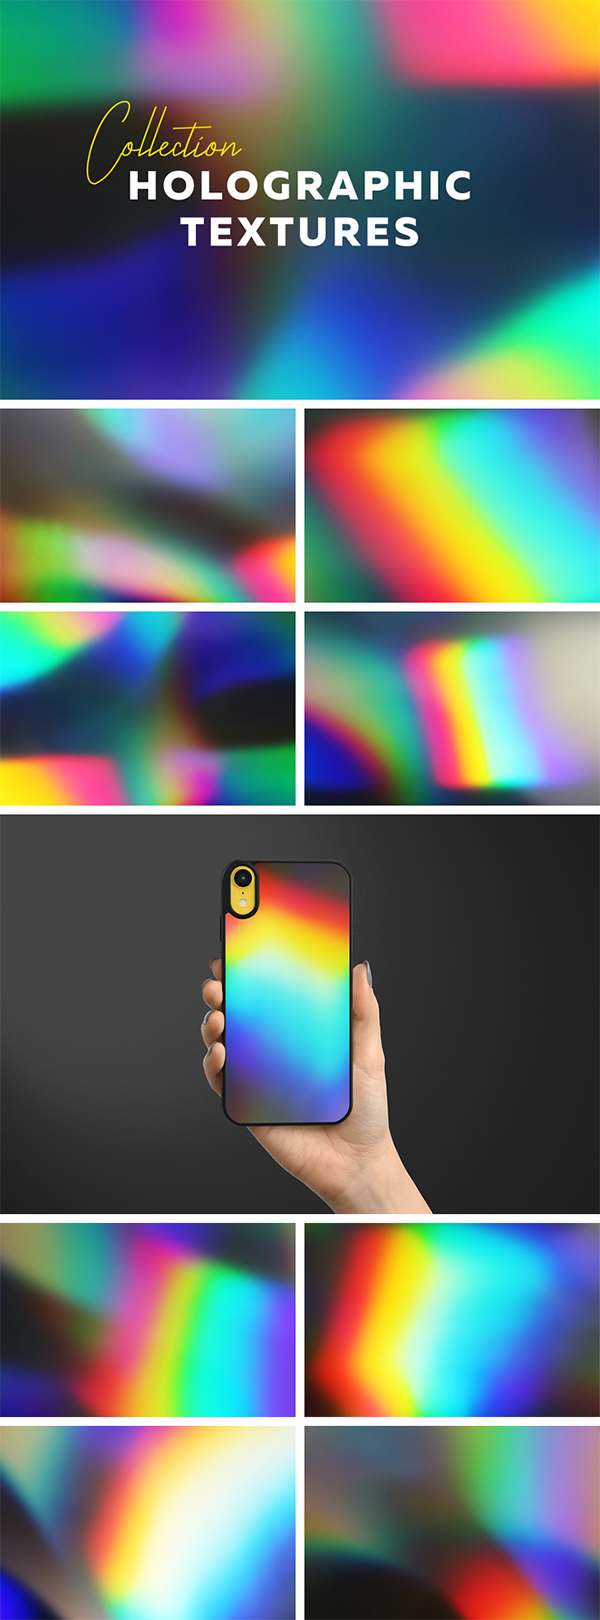 Holographic Texture Collection